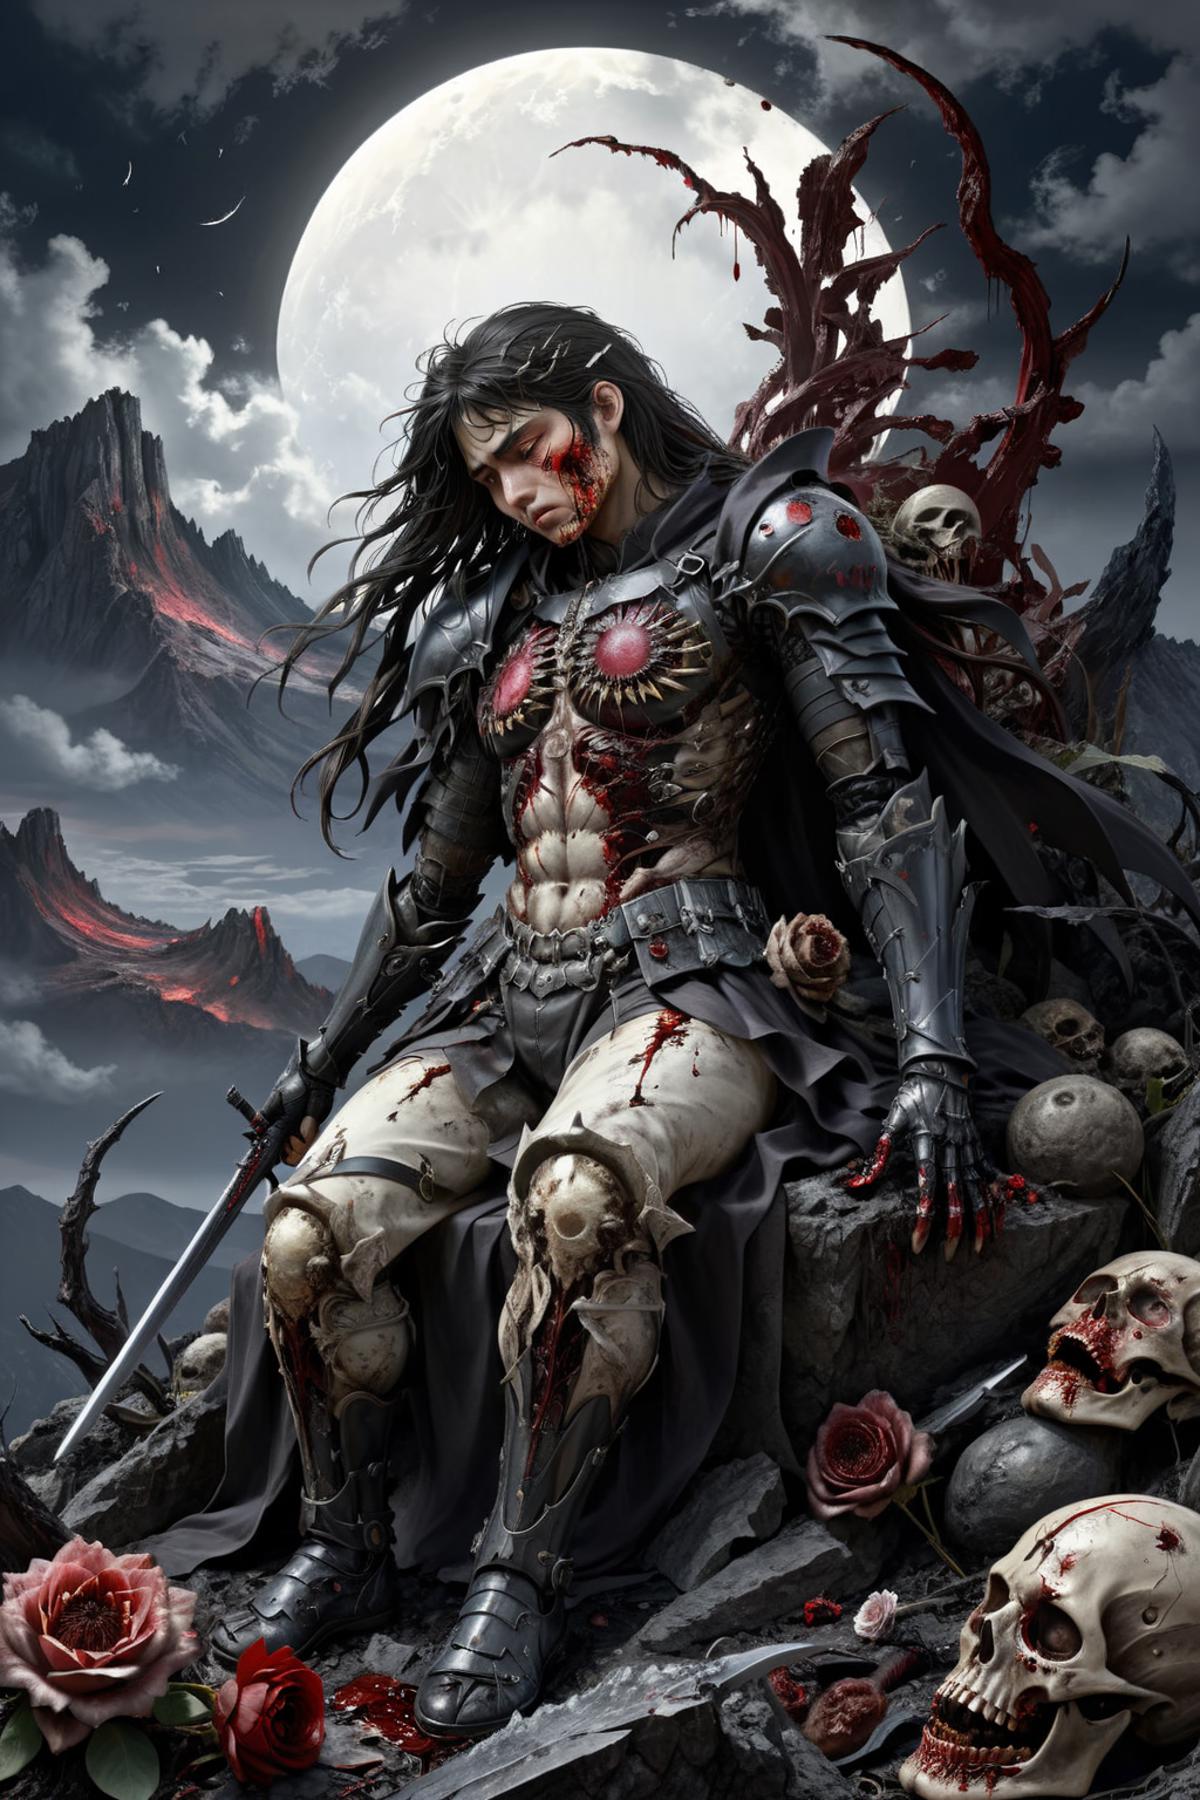 A Fantasy Artwork of a Warrior with Bloodied Armor and a Sword.